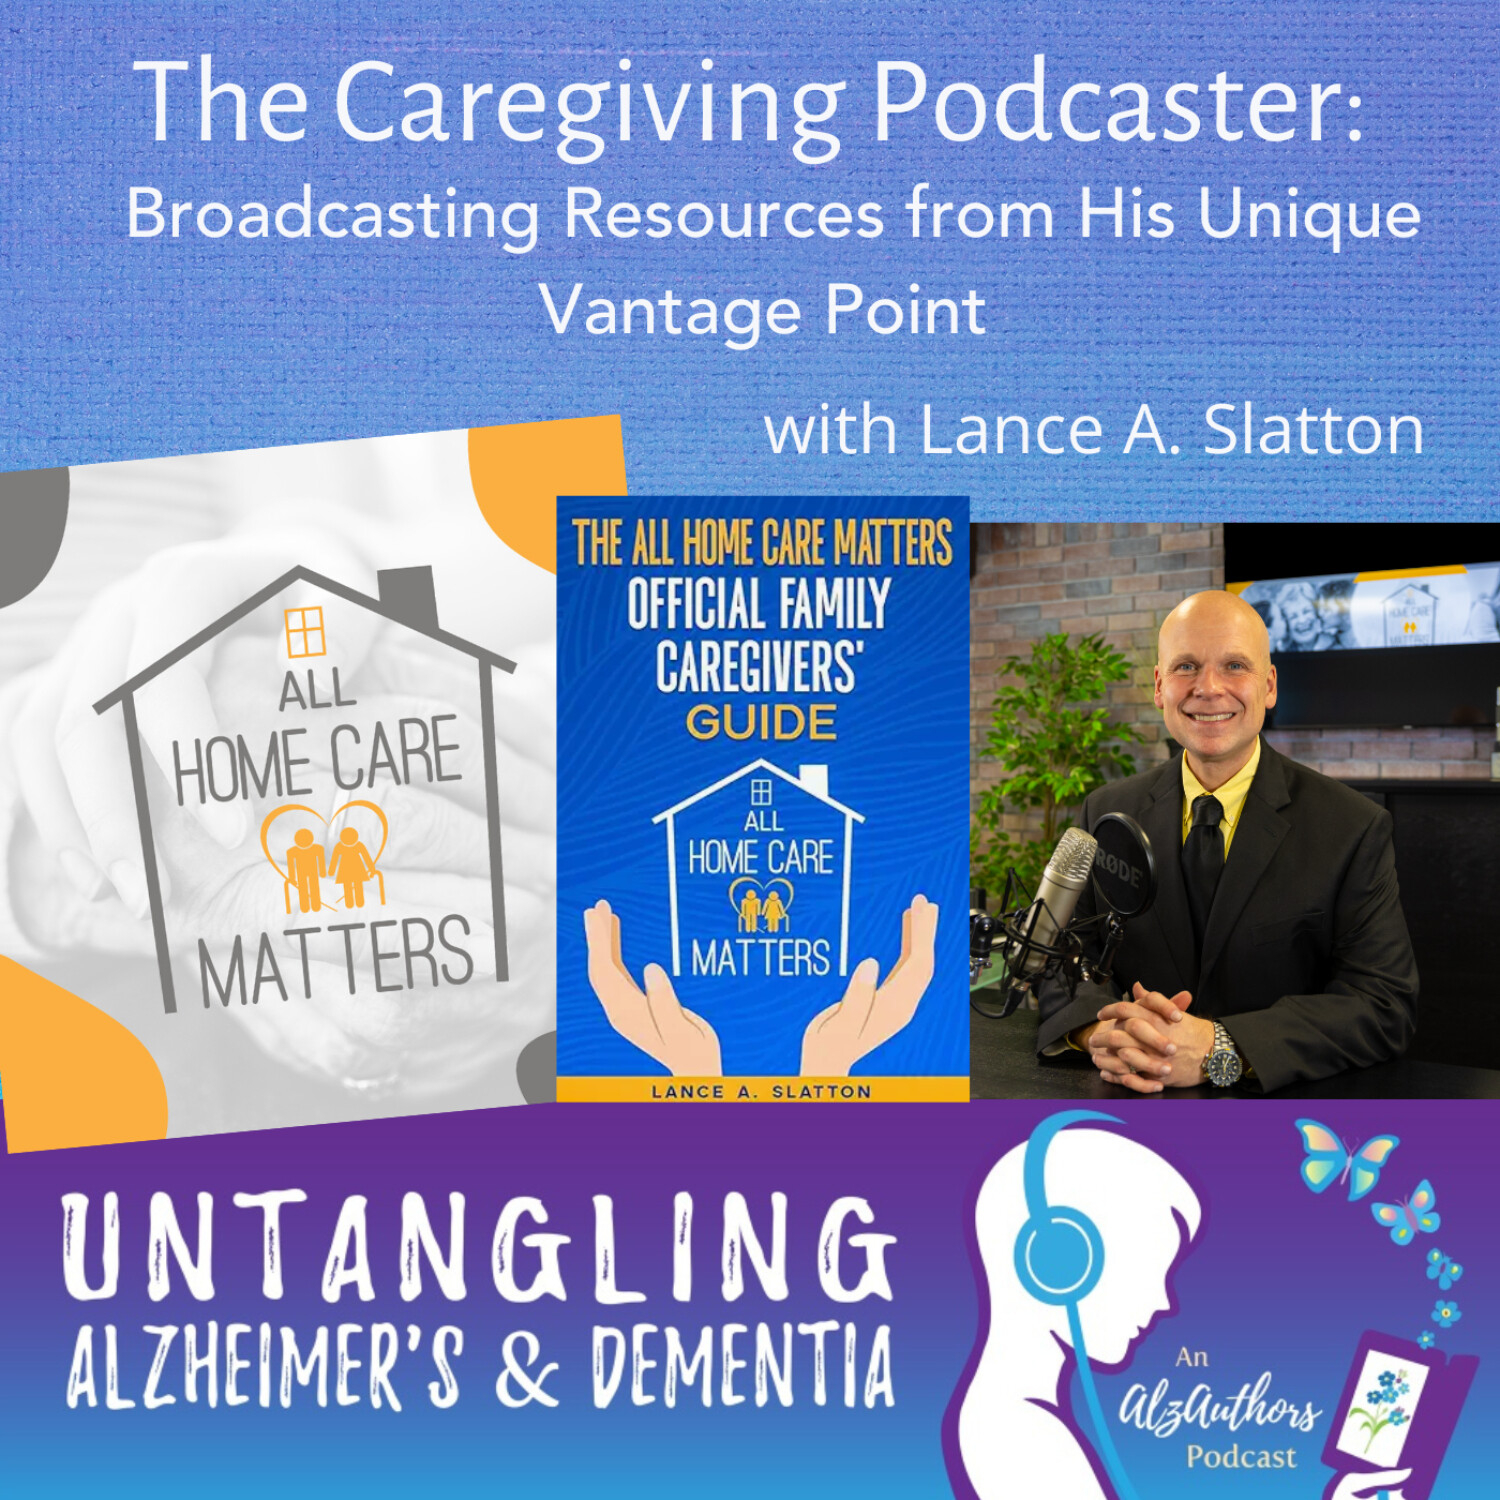 The Caregiving Podcaster: Broadcasting Resources from His Unique Vantage Point